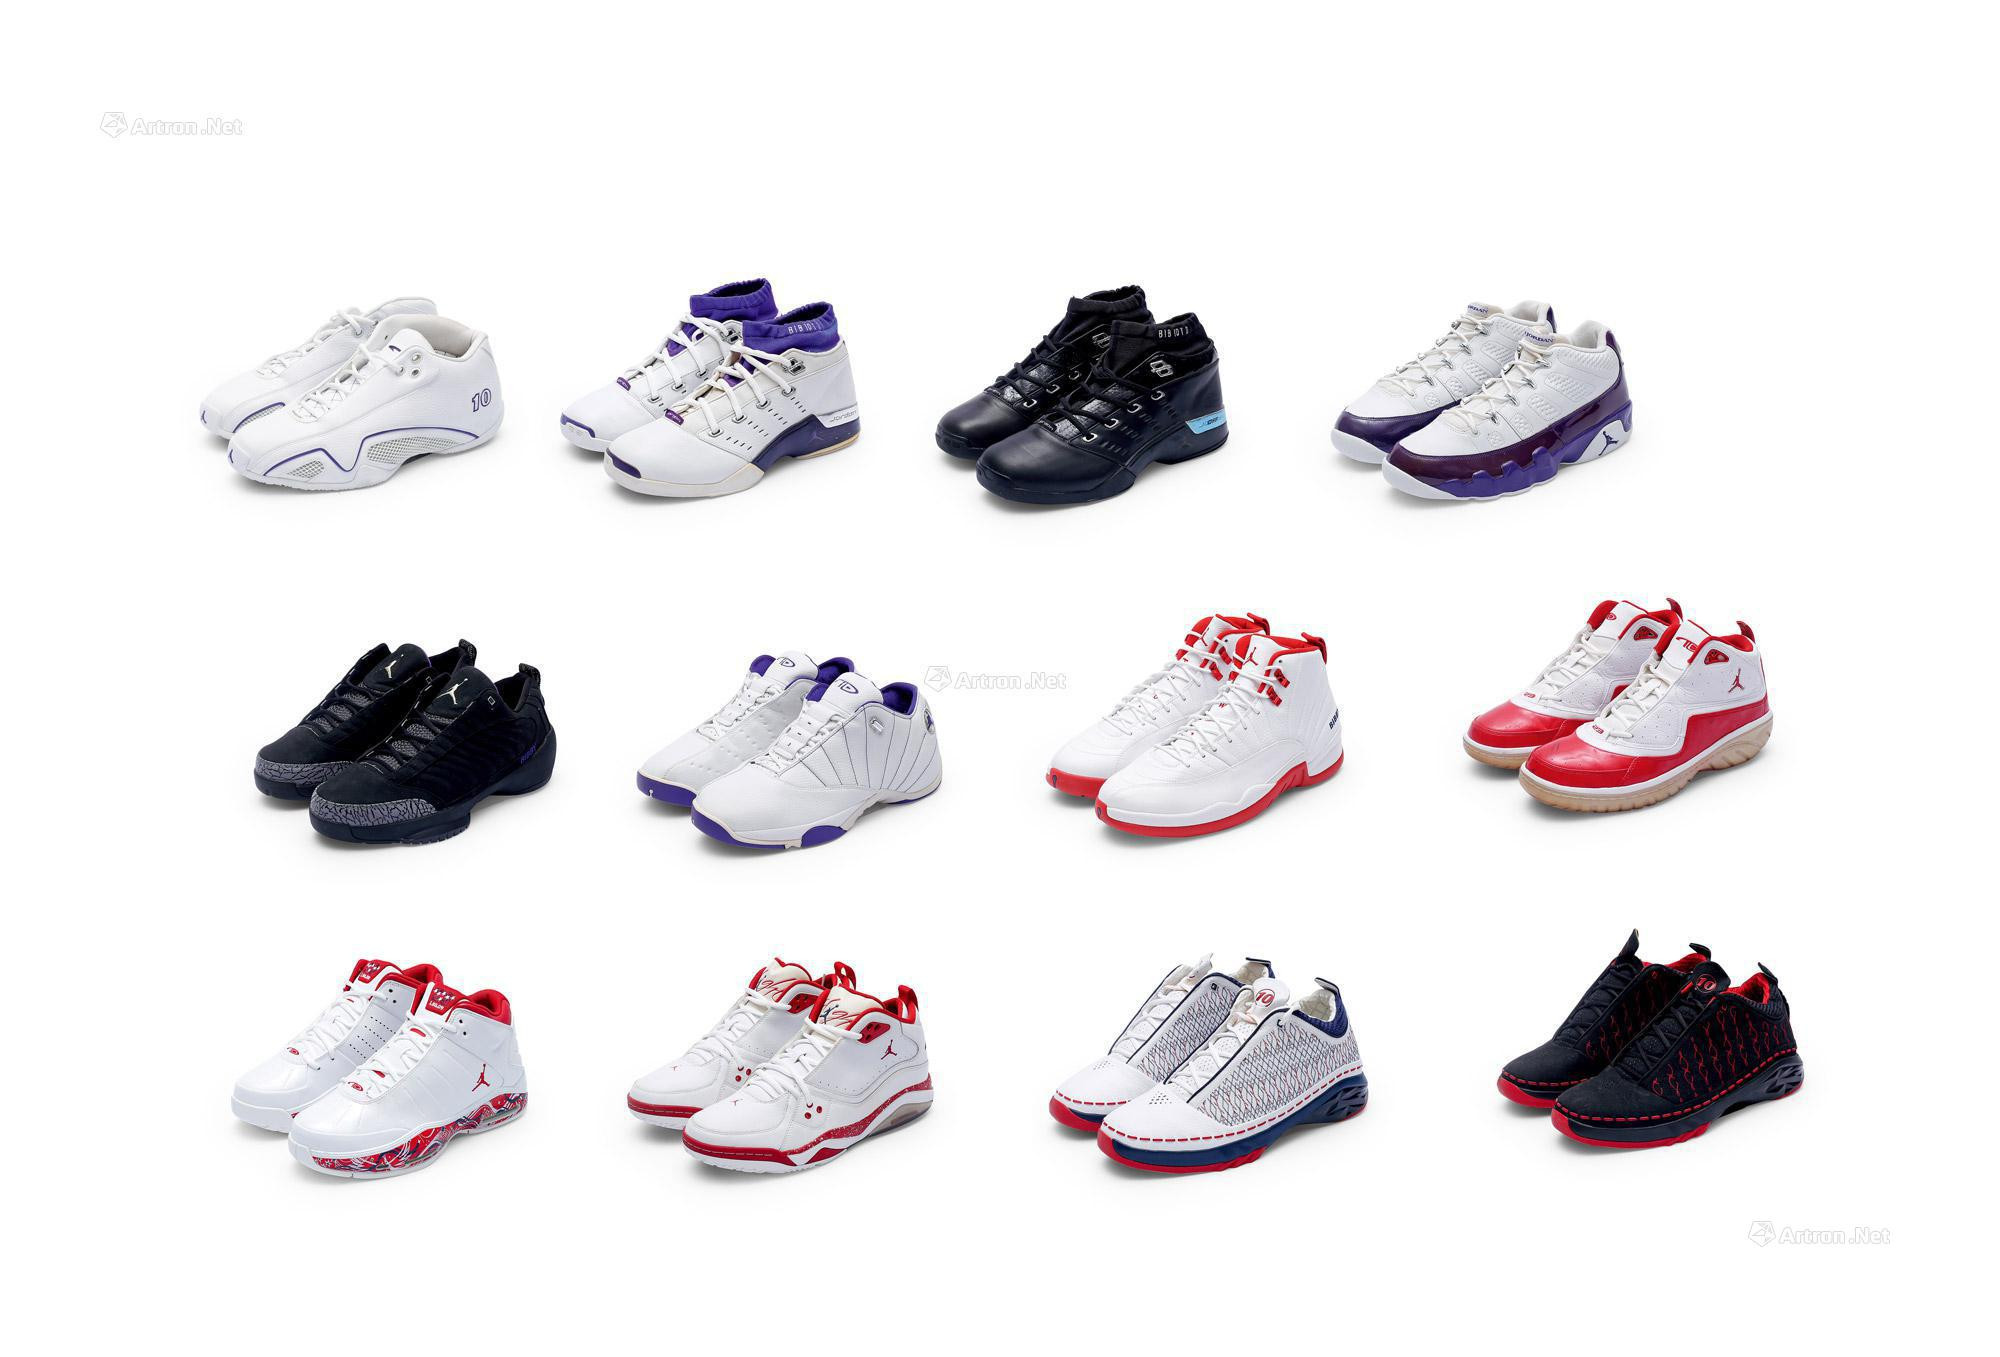 Mike Bibby Exclusive Sneaker Collection  12 Pairs of Player Exclusive Sneakers